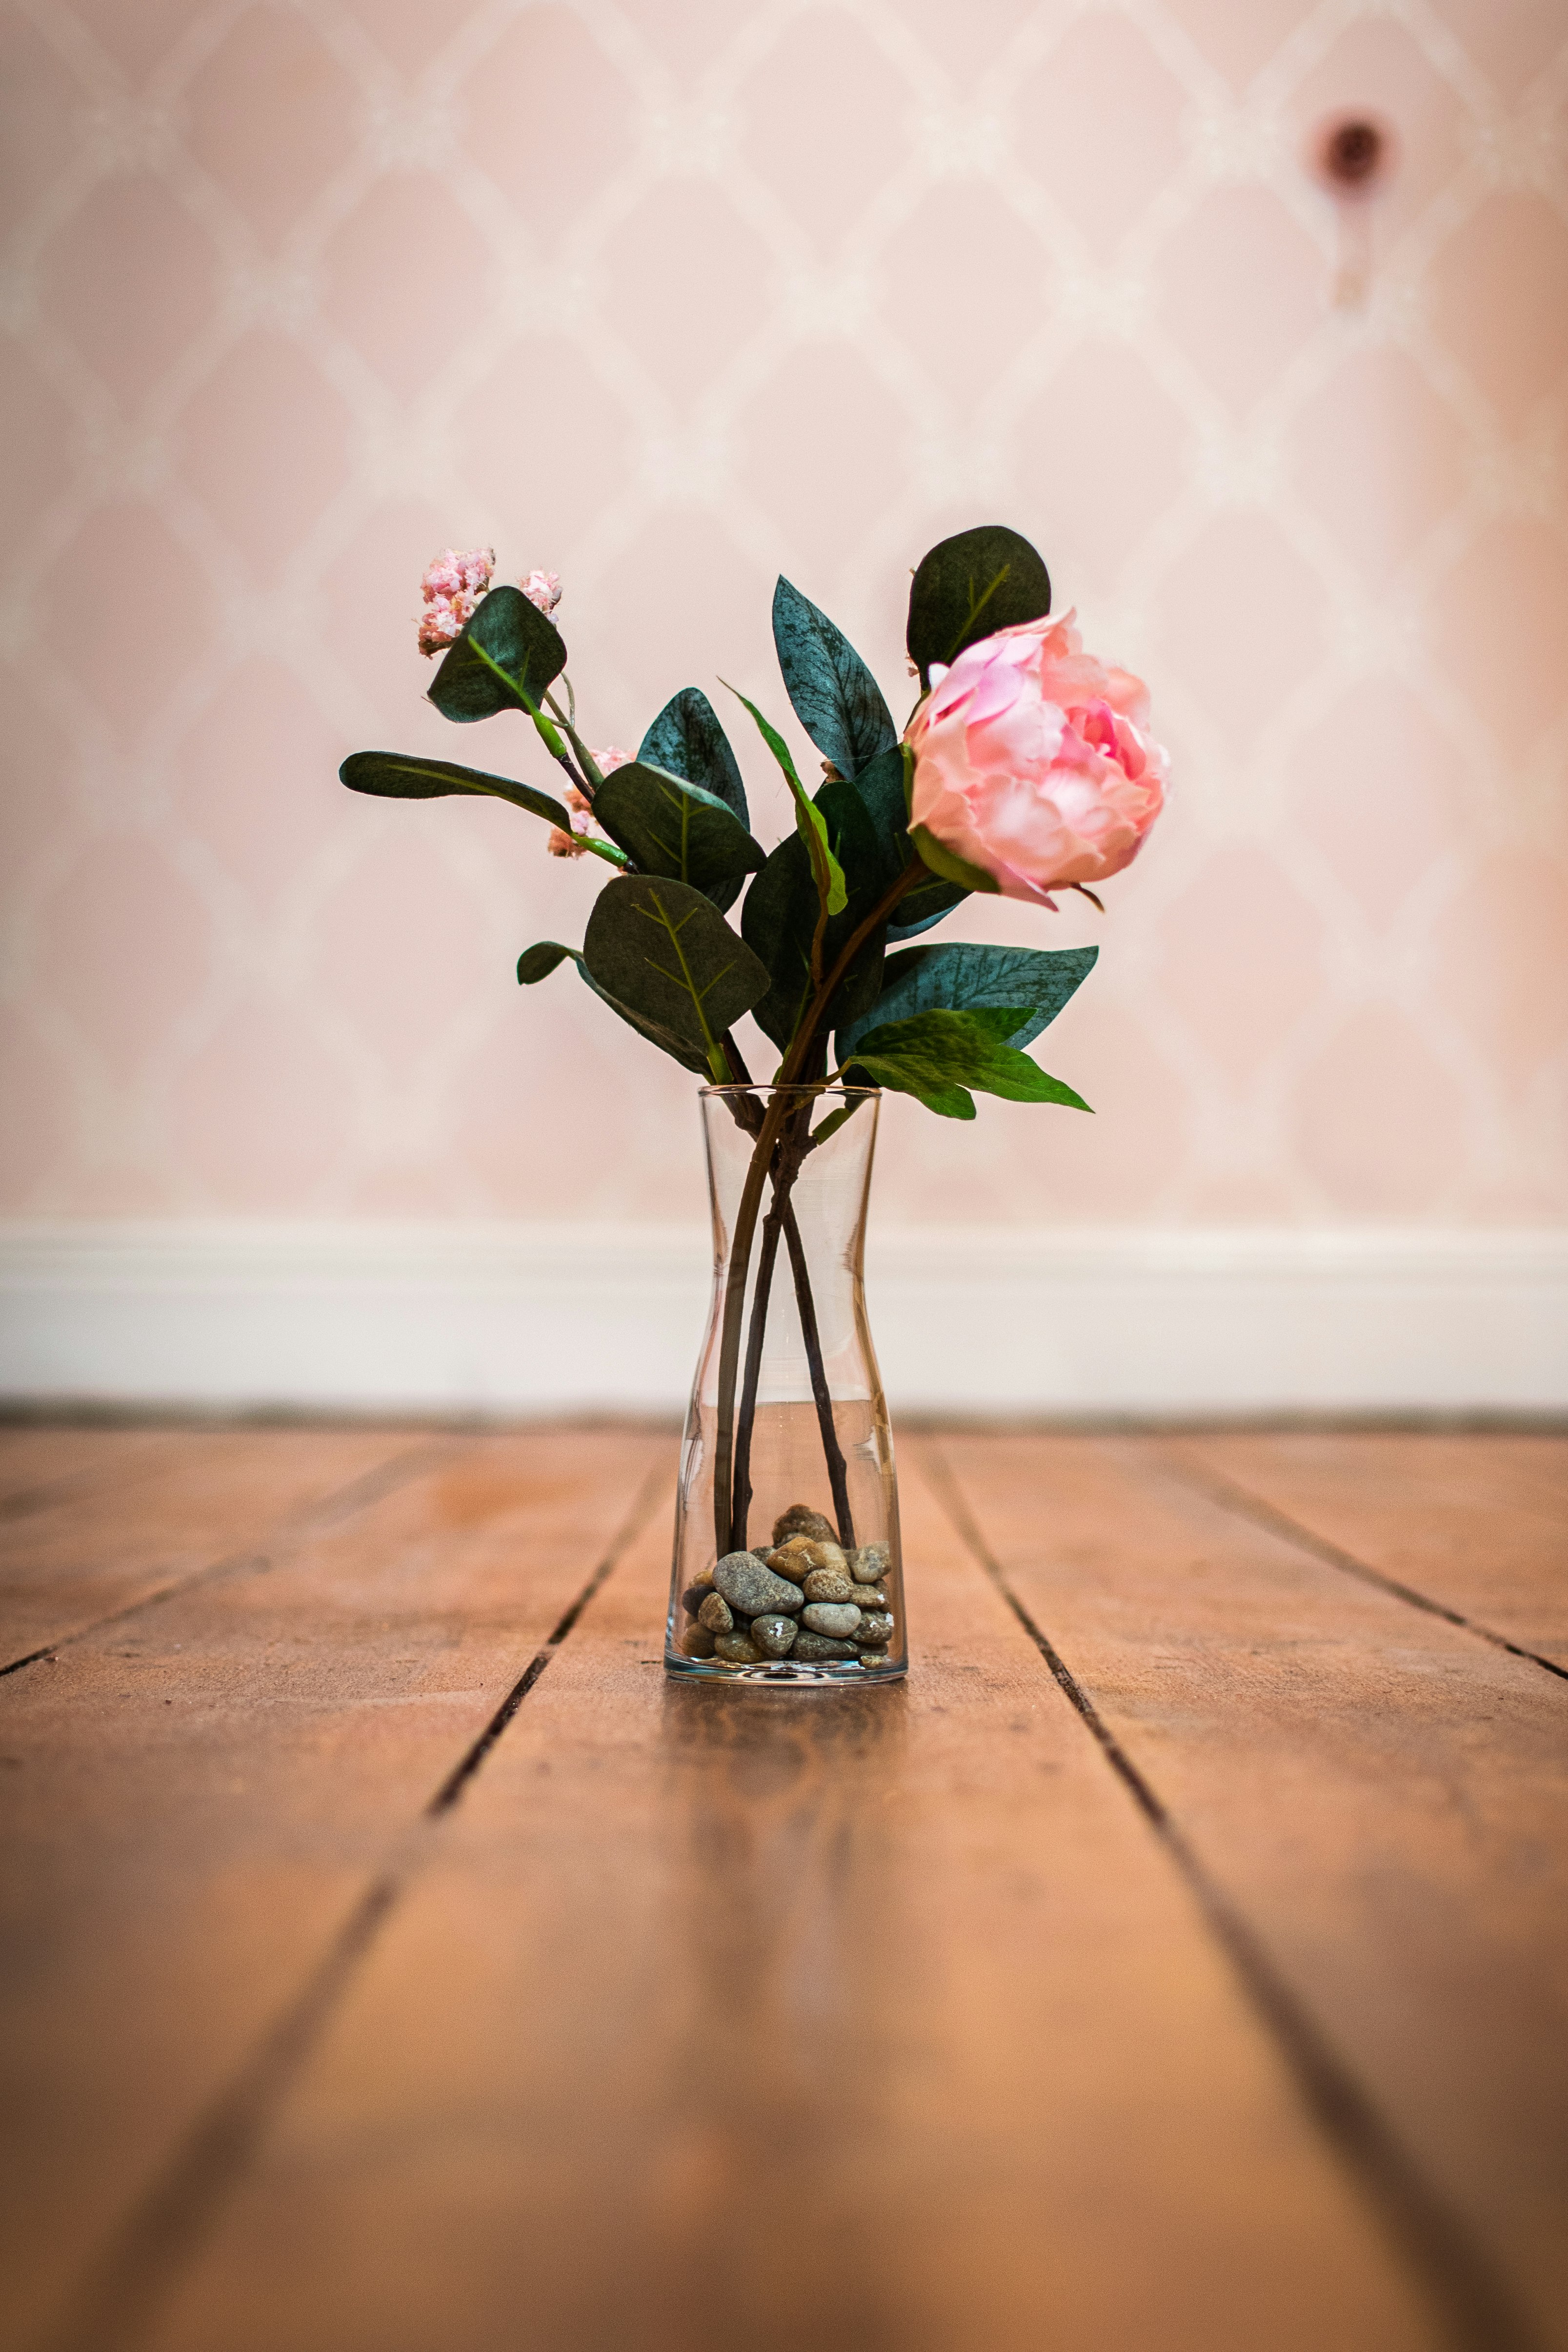 pink roses in clear glass vase